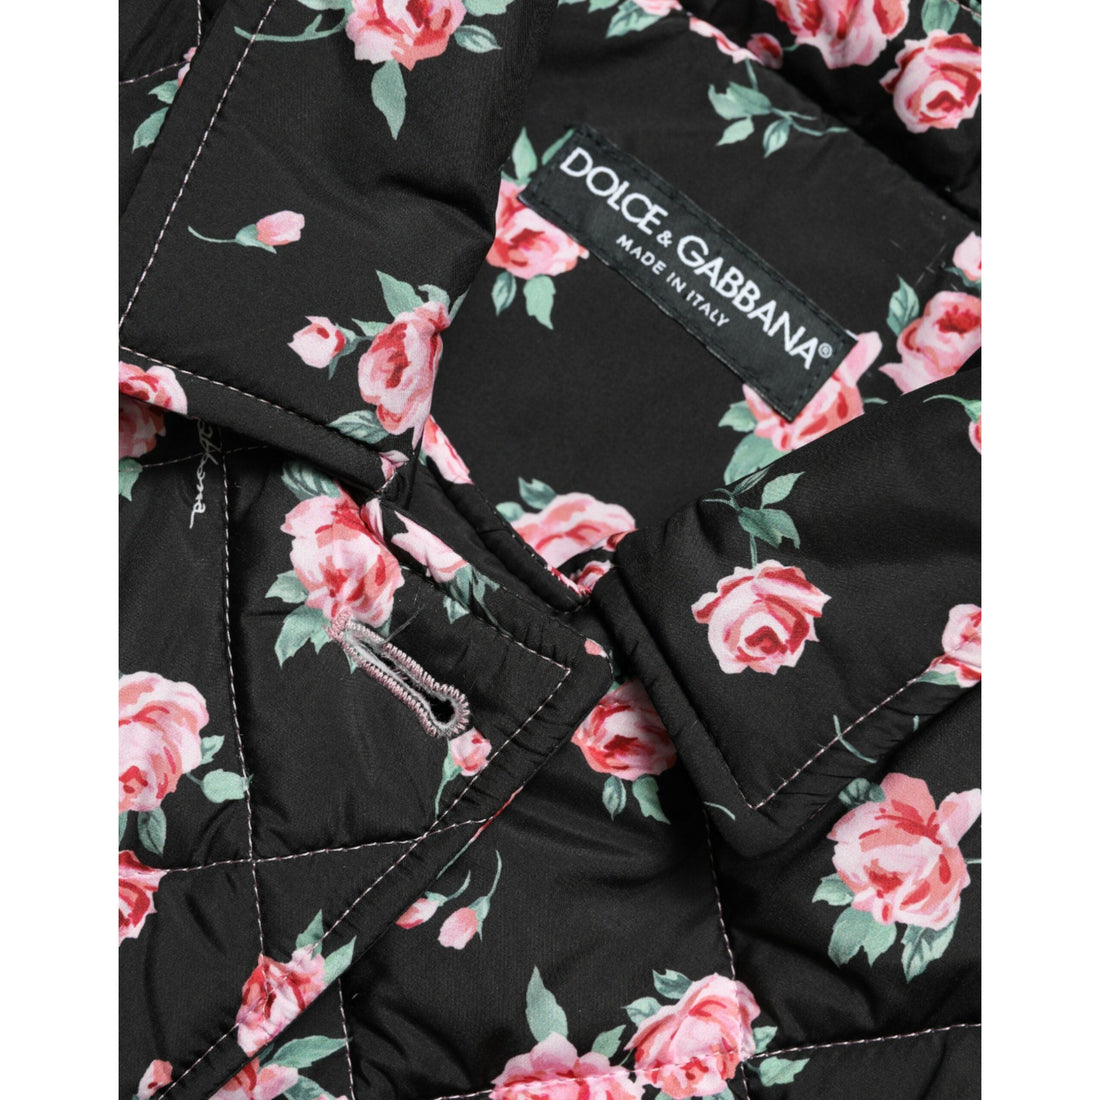 Dolce & Gabbana Black Floral Collared Trench Coat Jacket